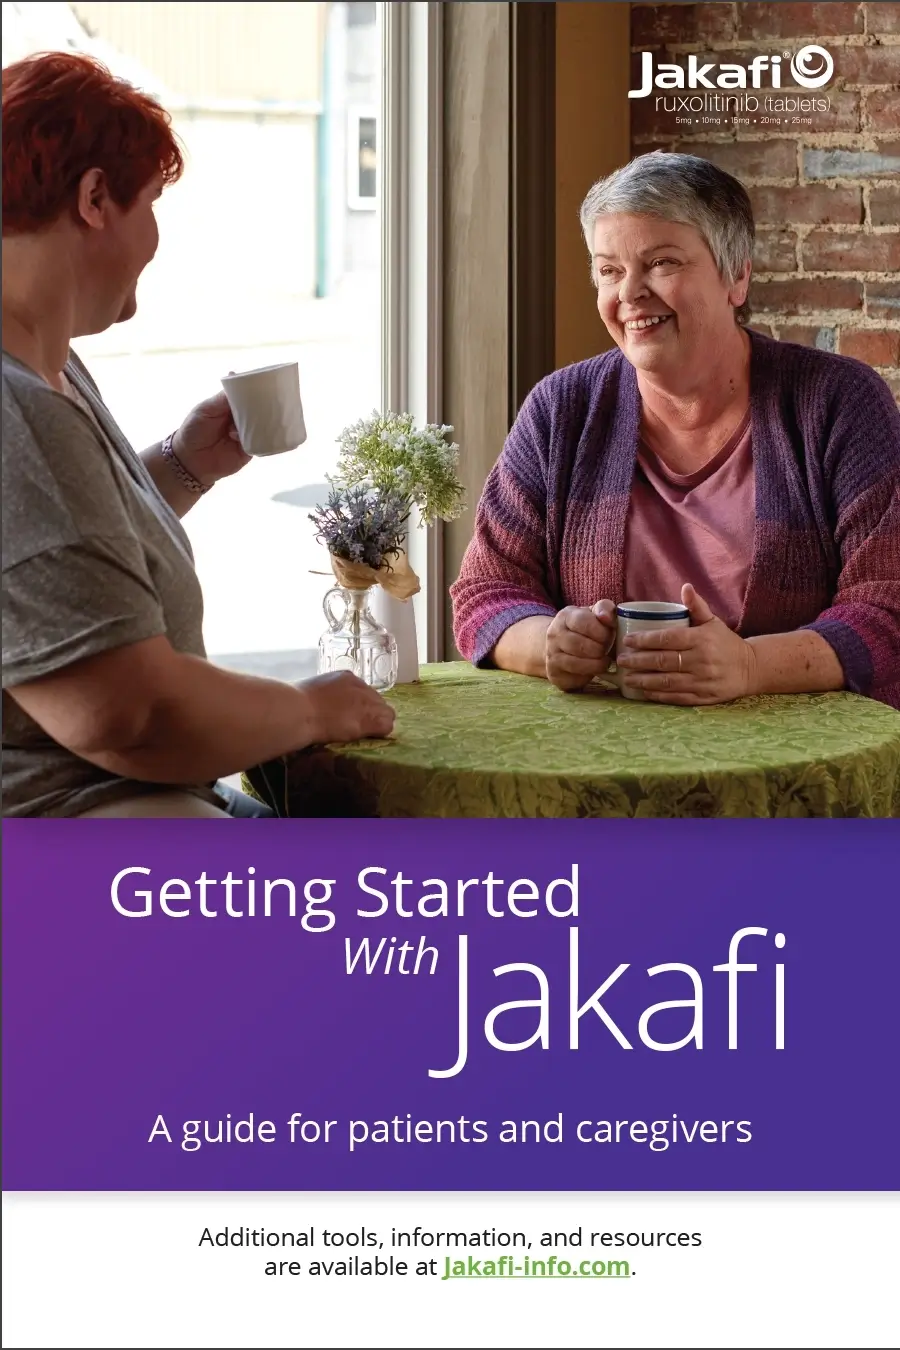 Image of the Getting Started with Jakafi Brochure